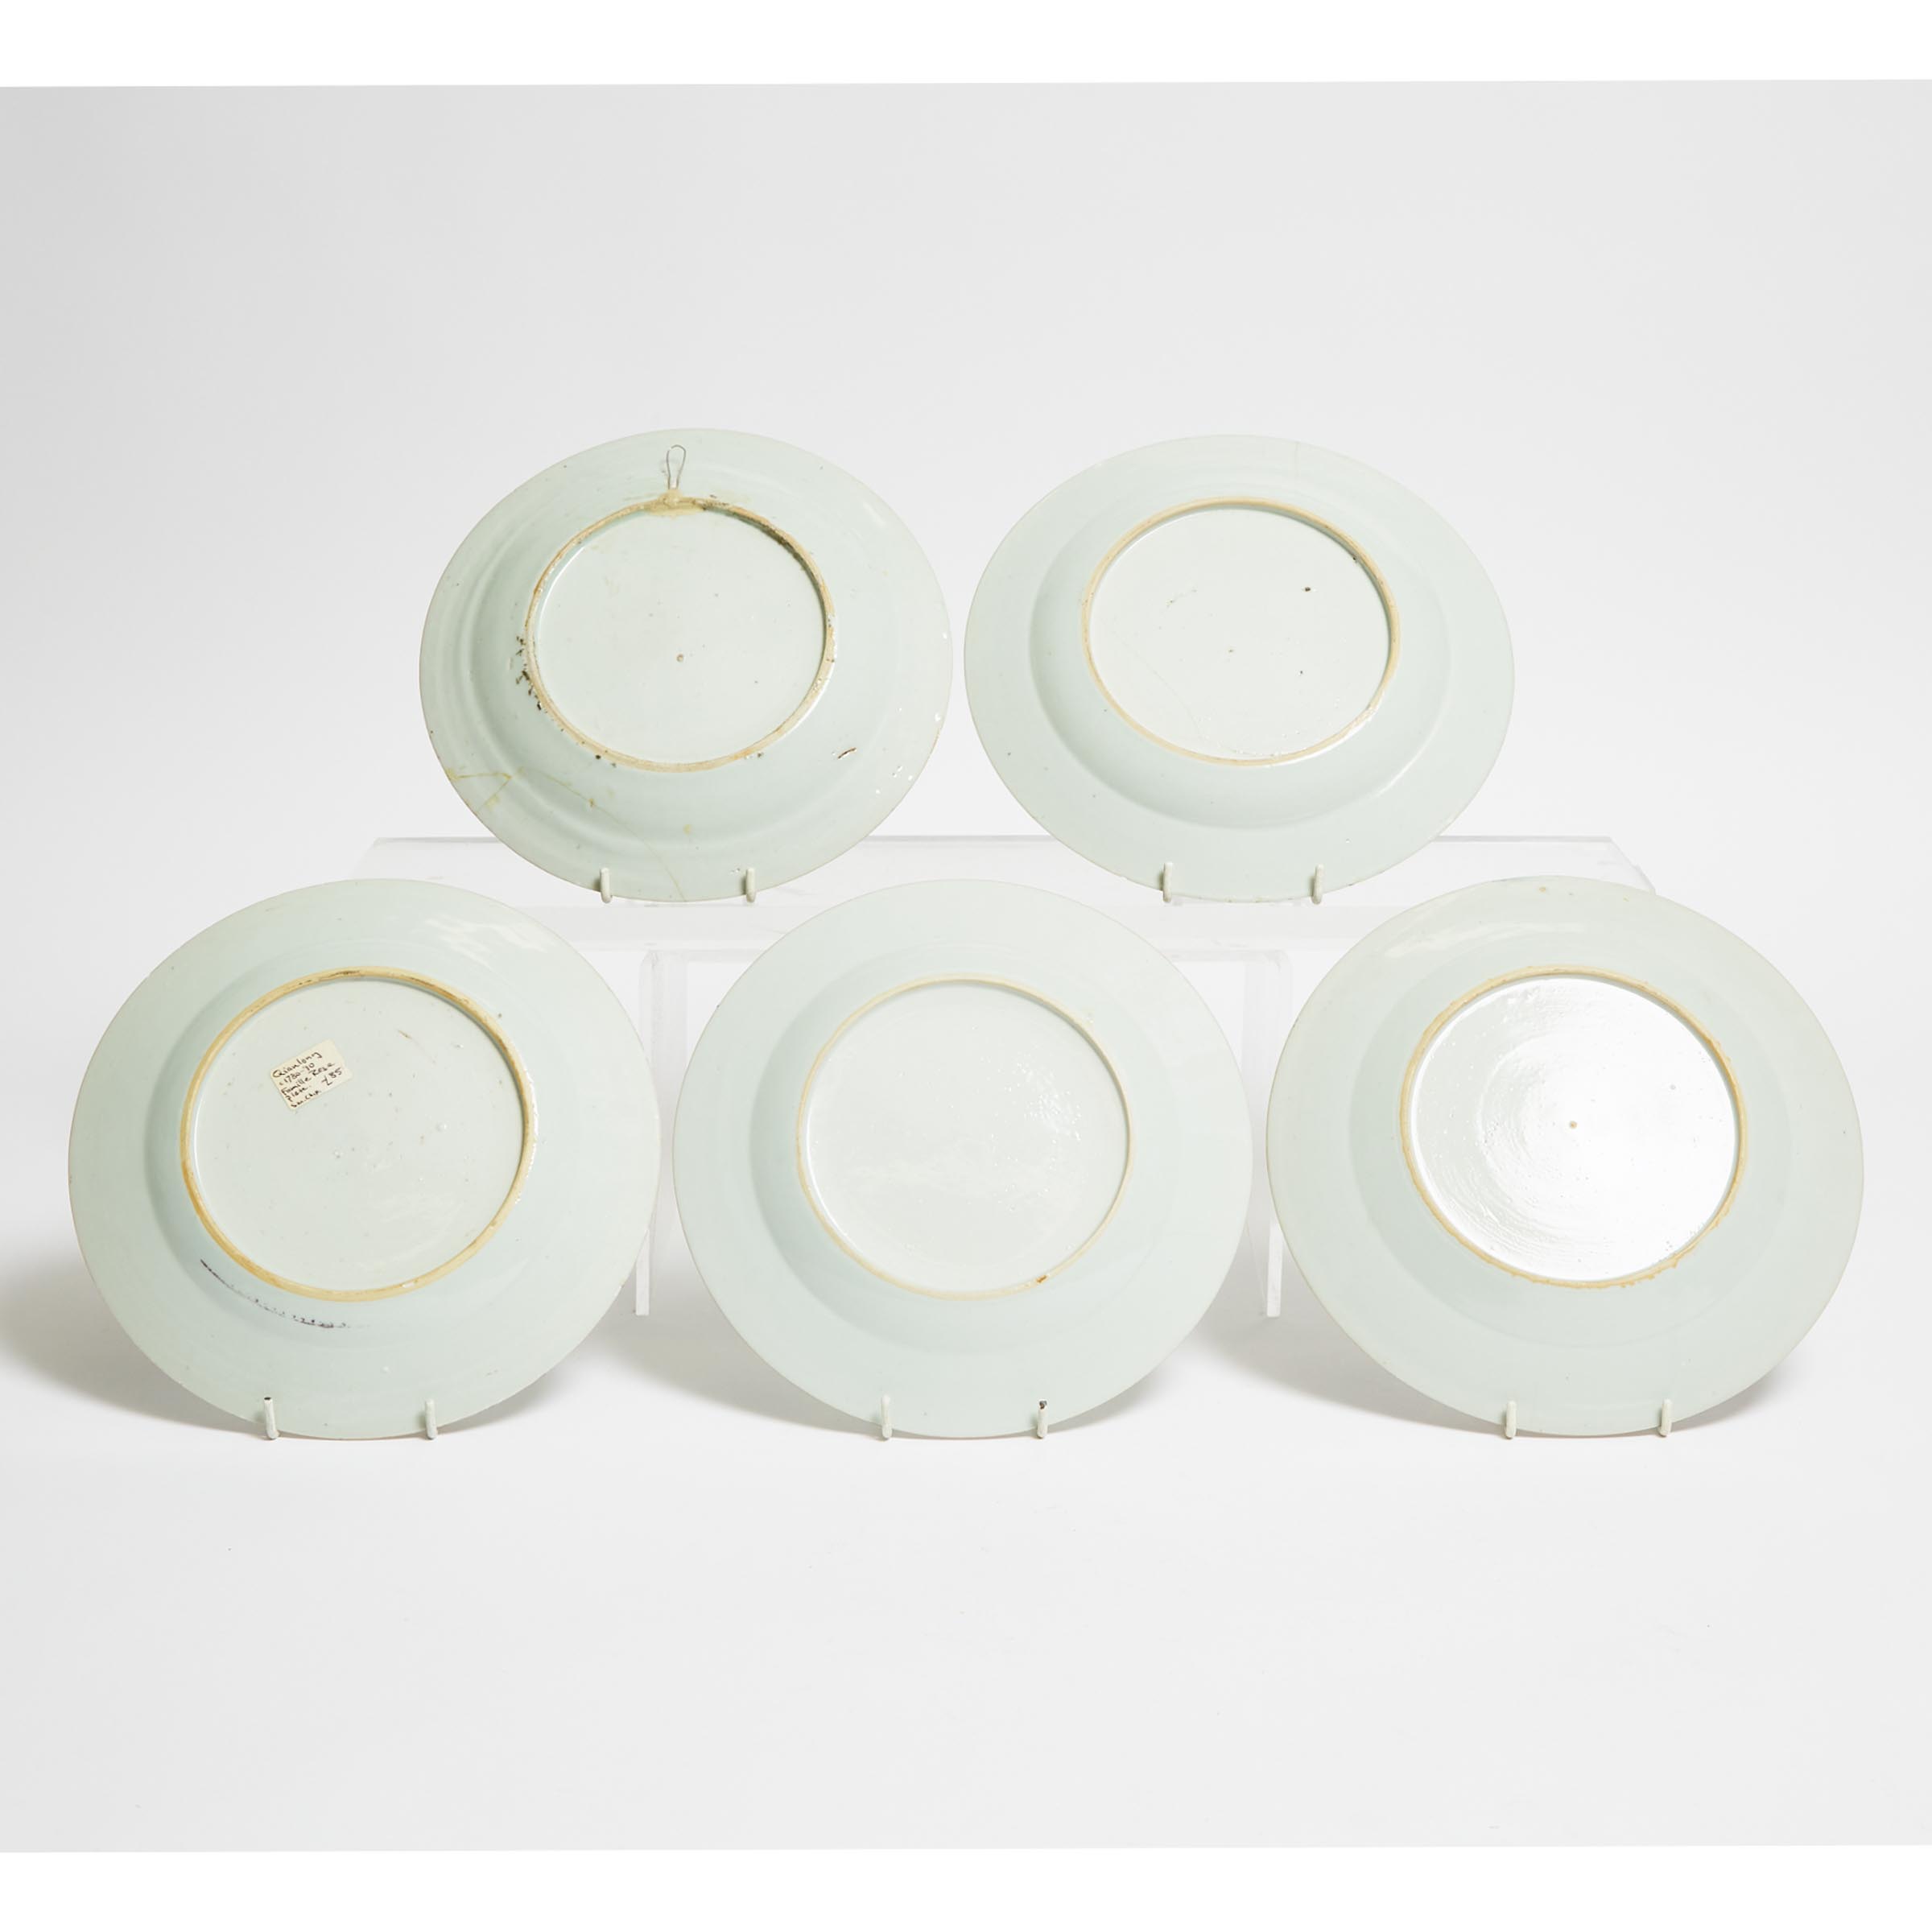 A Group of Five Chinese Export Famille Rose Dishes, Qianlong Period, 18th Century